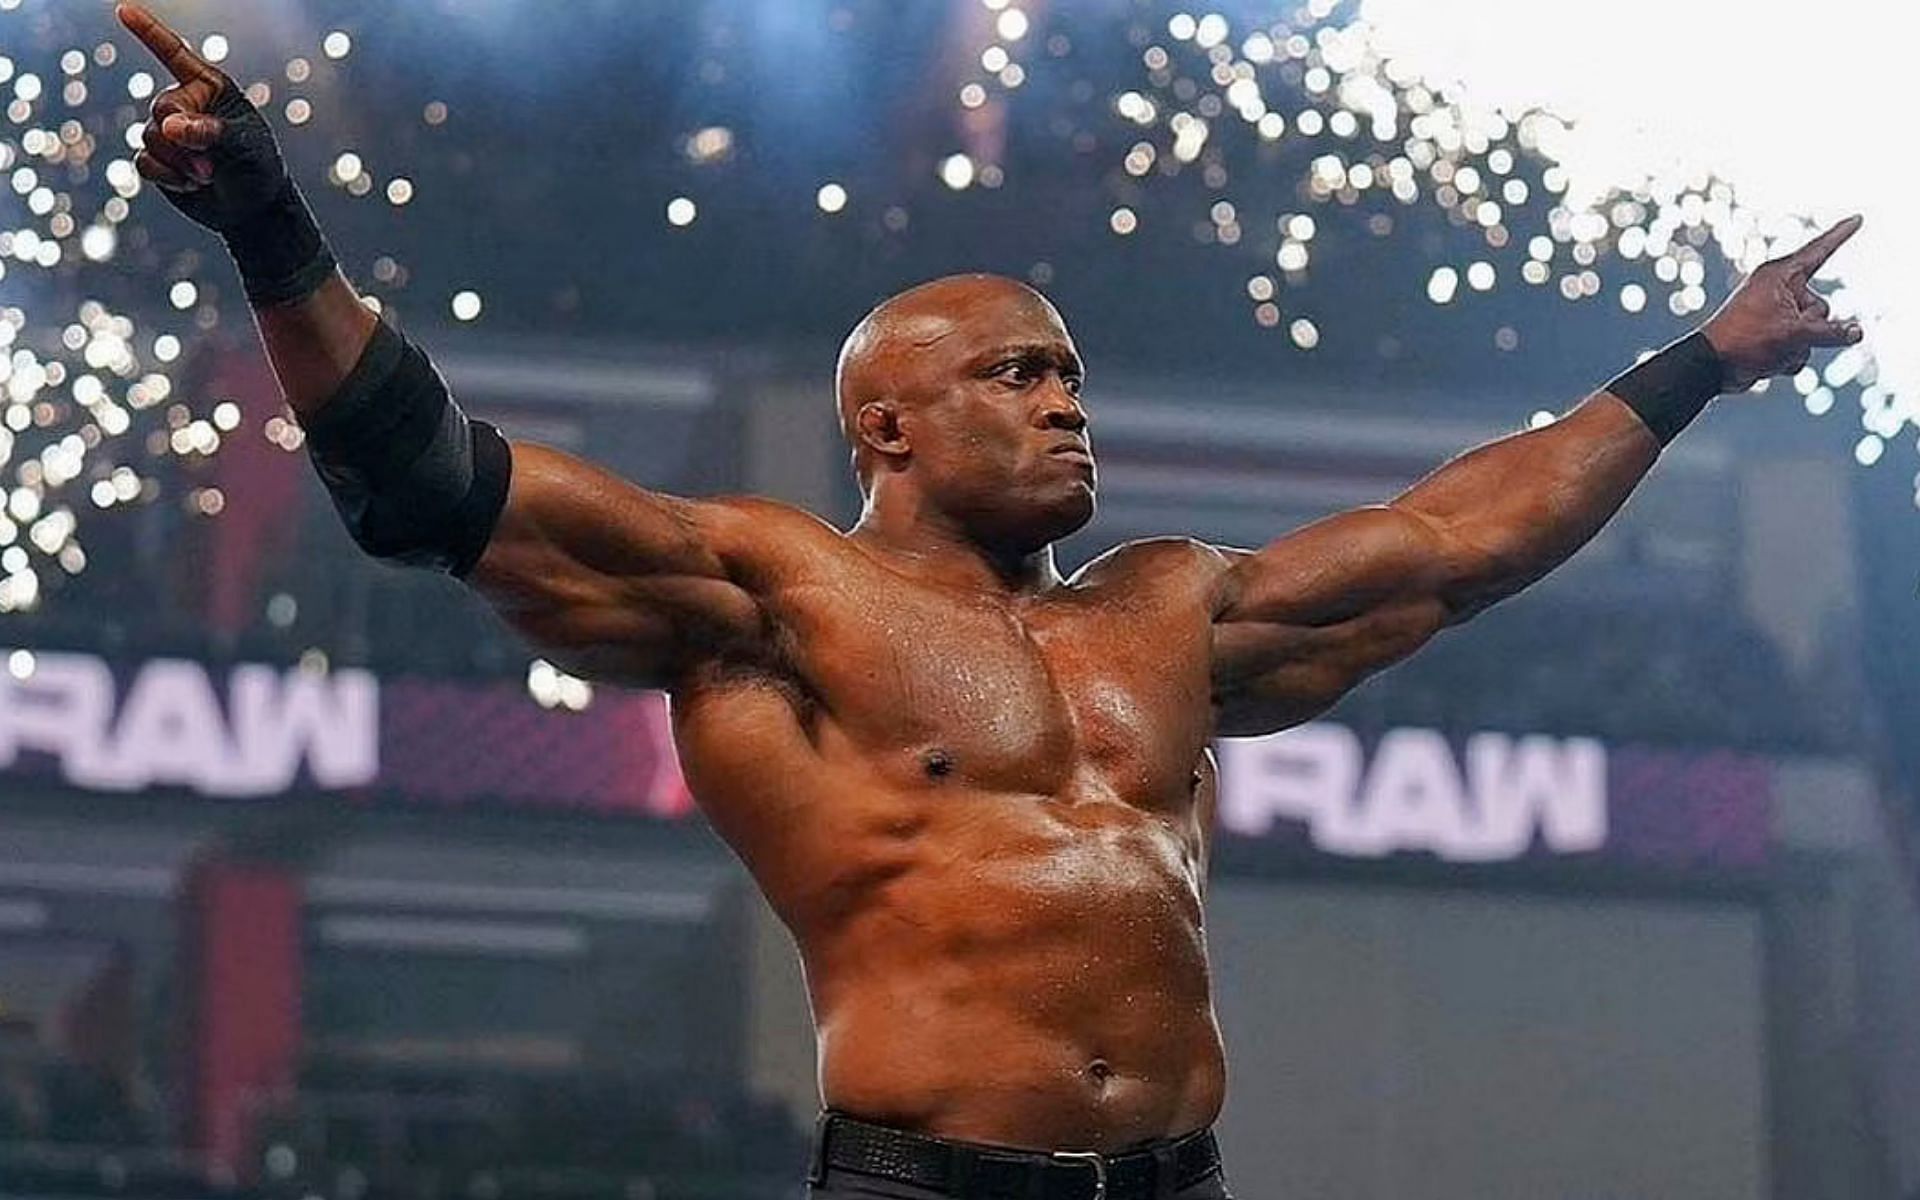 Bobby Lashley is currently in his third reign as United States Champion